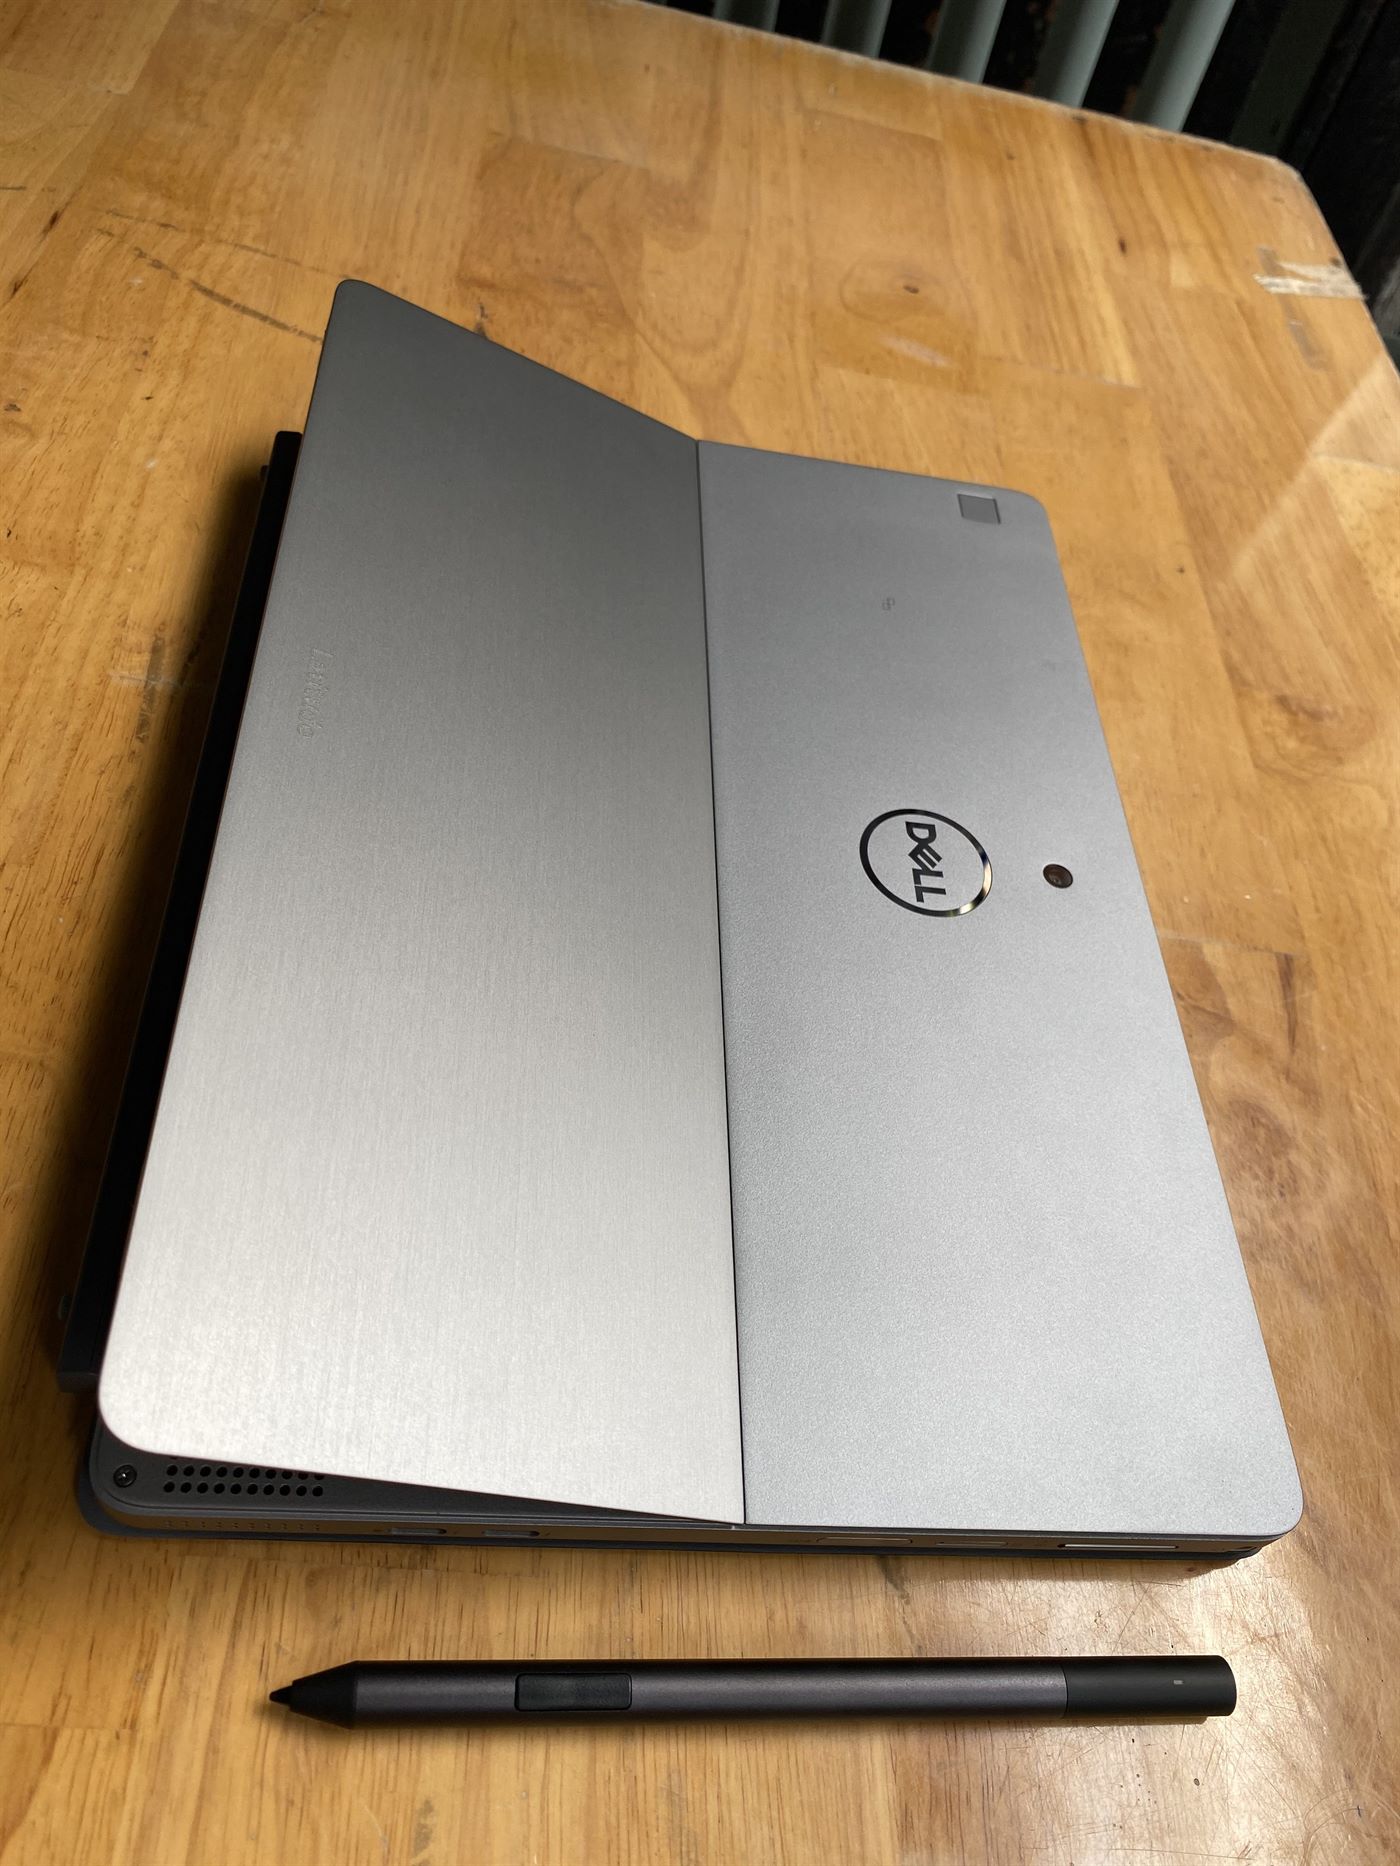 Dell Latitude 7200 2in1, i7 8665u, 16G, 512G, , touch - laptop cũ giá  rẻ